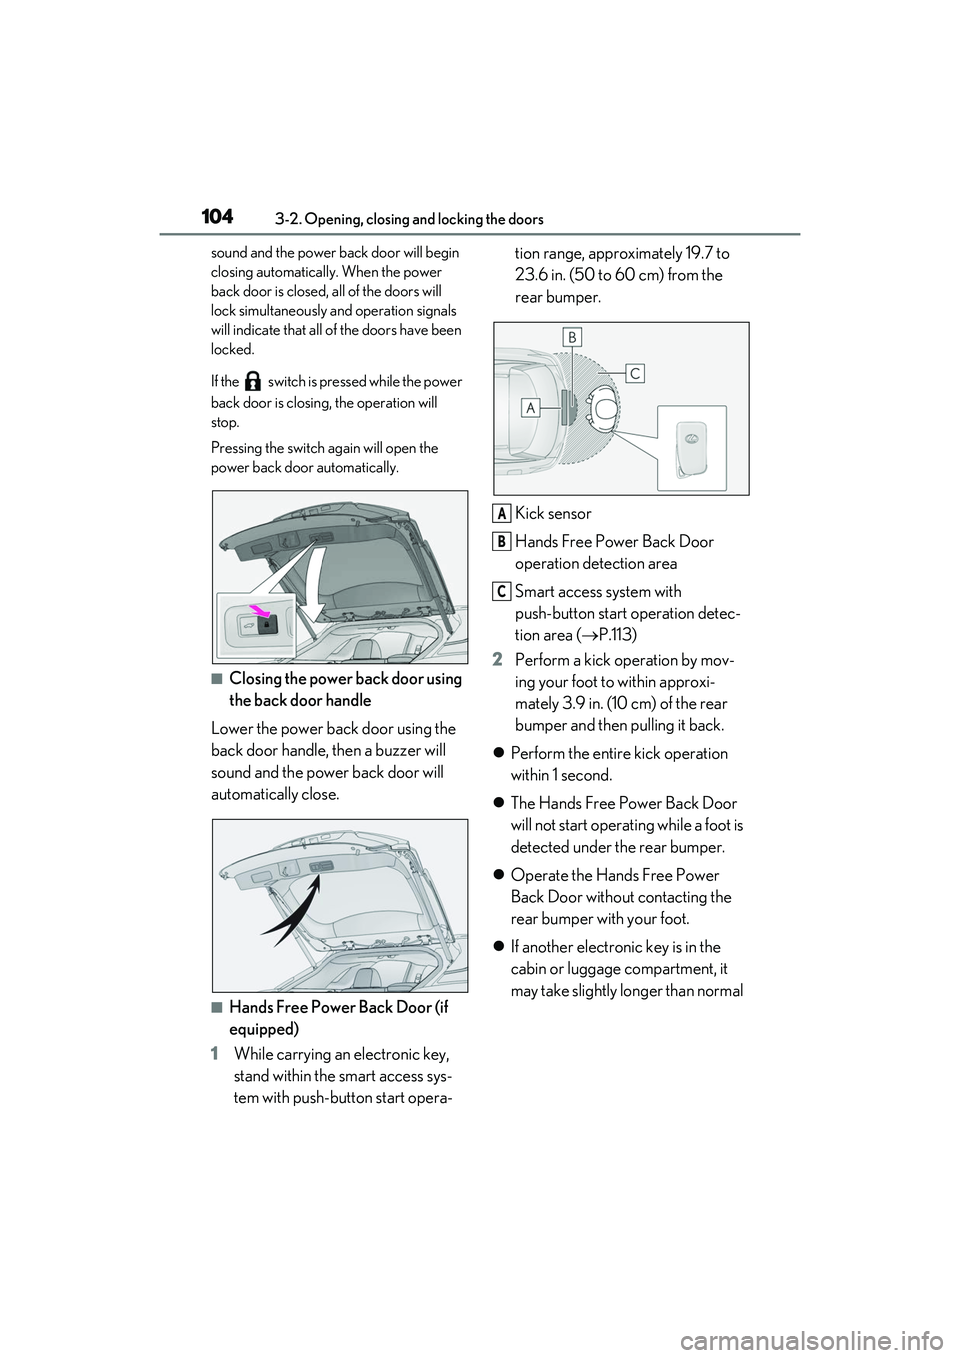 LEXUS RX350 2022  Owners Manual 1043-2. Opening, closing and locking the doors
sound and the power back door will begin 
closing automatically. When the power 
back door is closed, all of the doors will 
lock simultaneously and oper